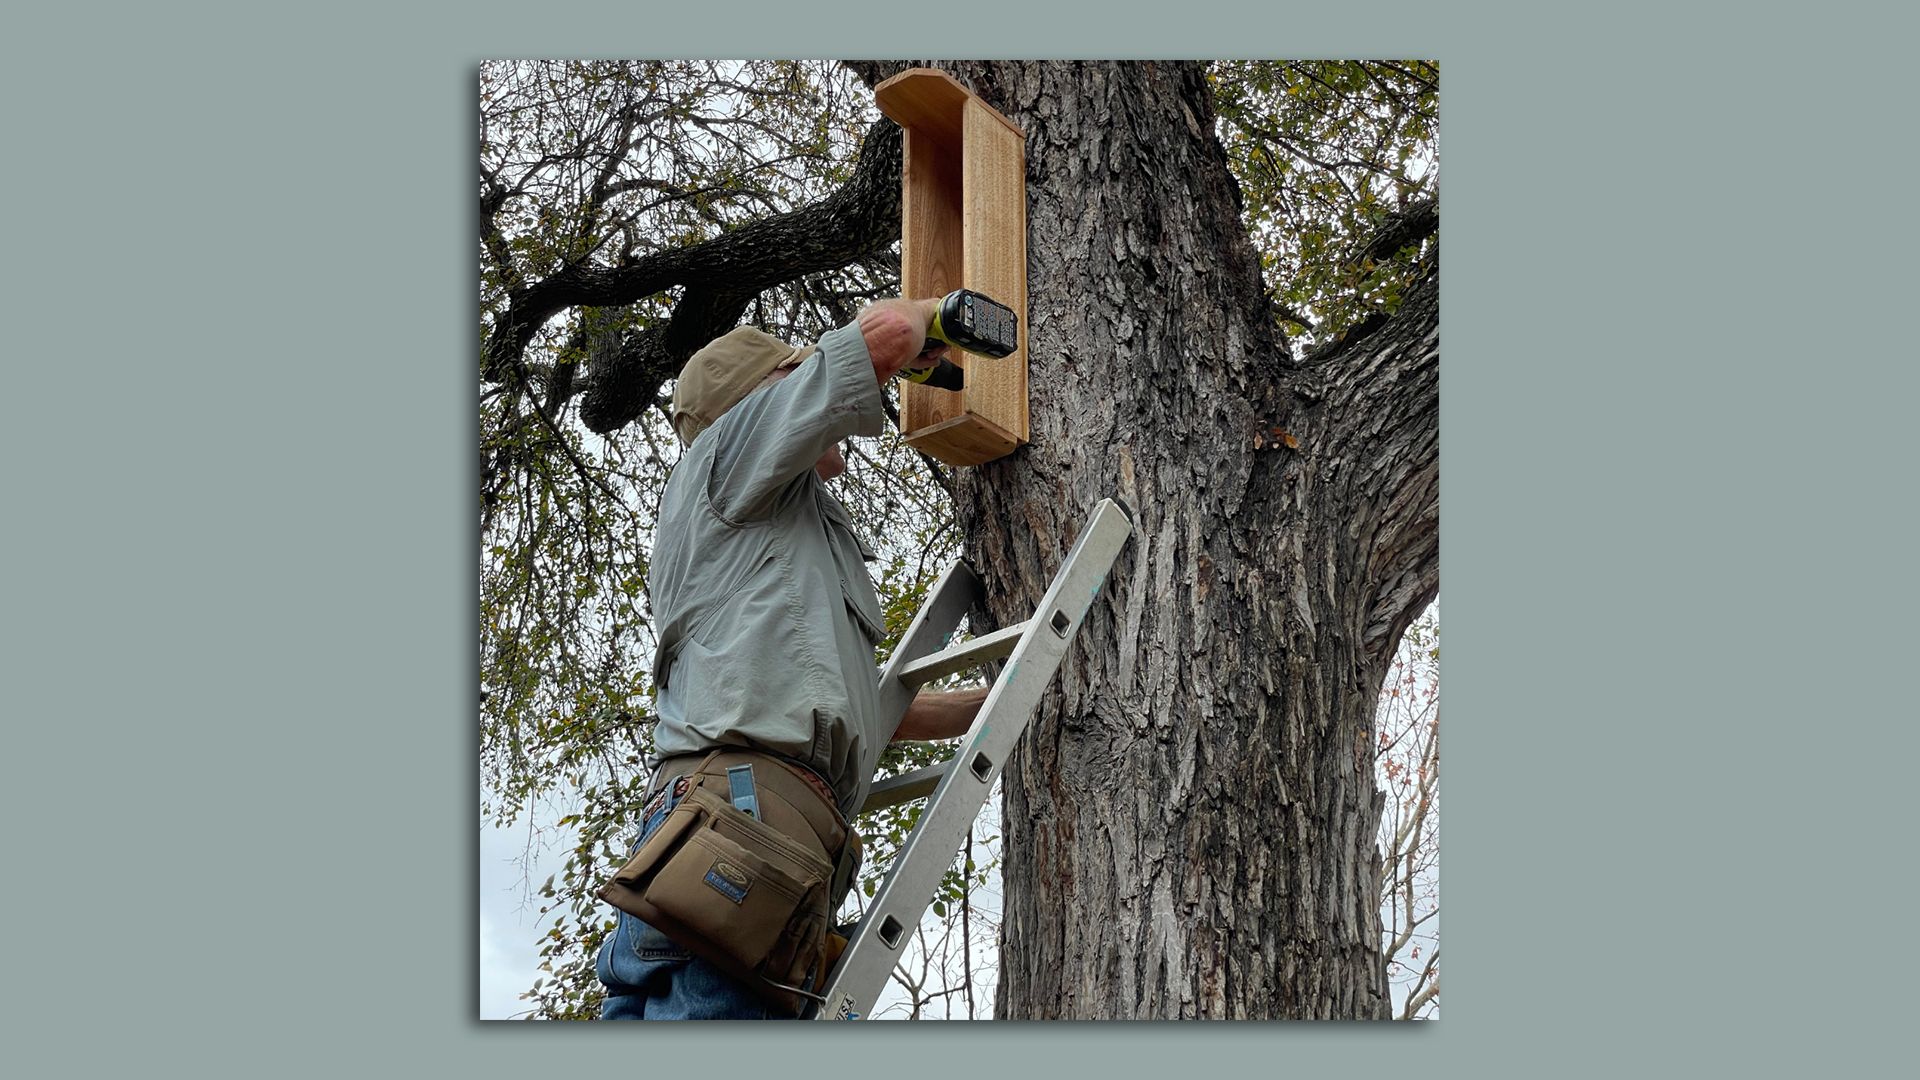 A man stands on a ladder, hanging a bird house on a tree.